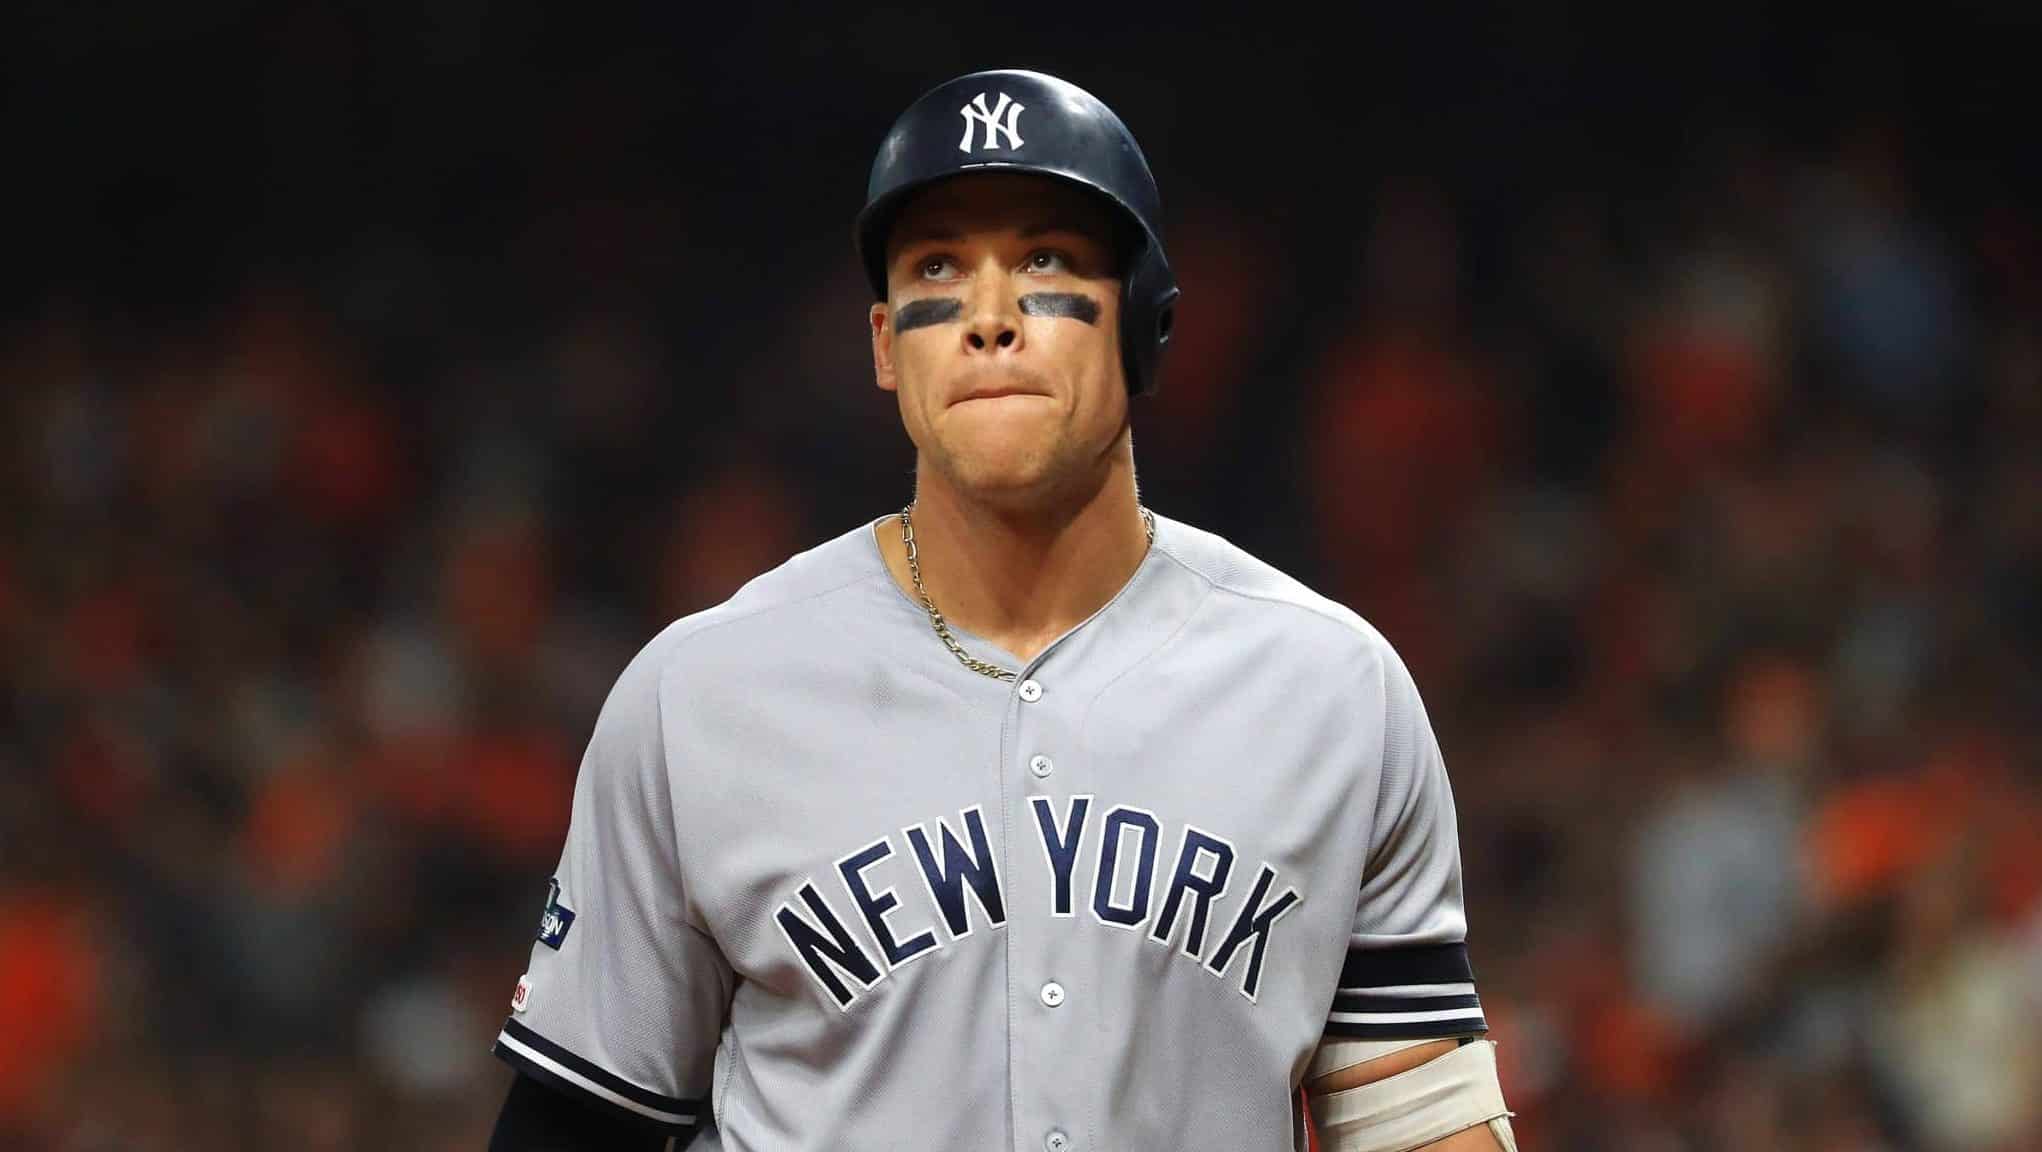 HOUSTON, TEXAS - OCTOBER 13: Aaron Judge #99 of the New York Yankees reacts after flying out during the sixth inning against the Houston Astros in game two of the American League Championship Series at Minute Maid Park on October 13, 2019 in Houston, Texas.